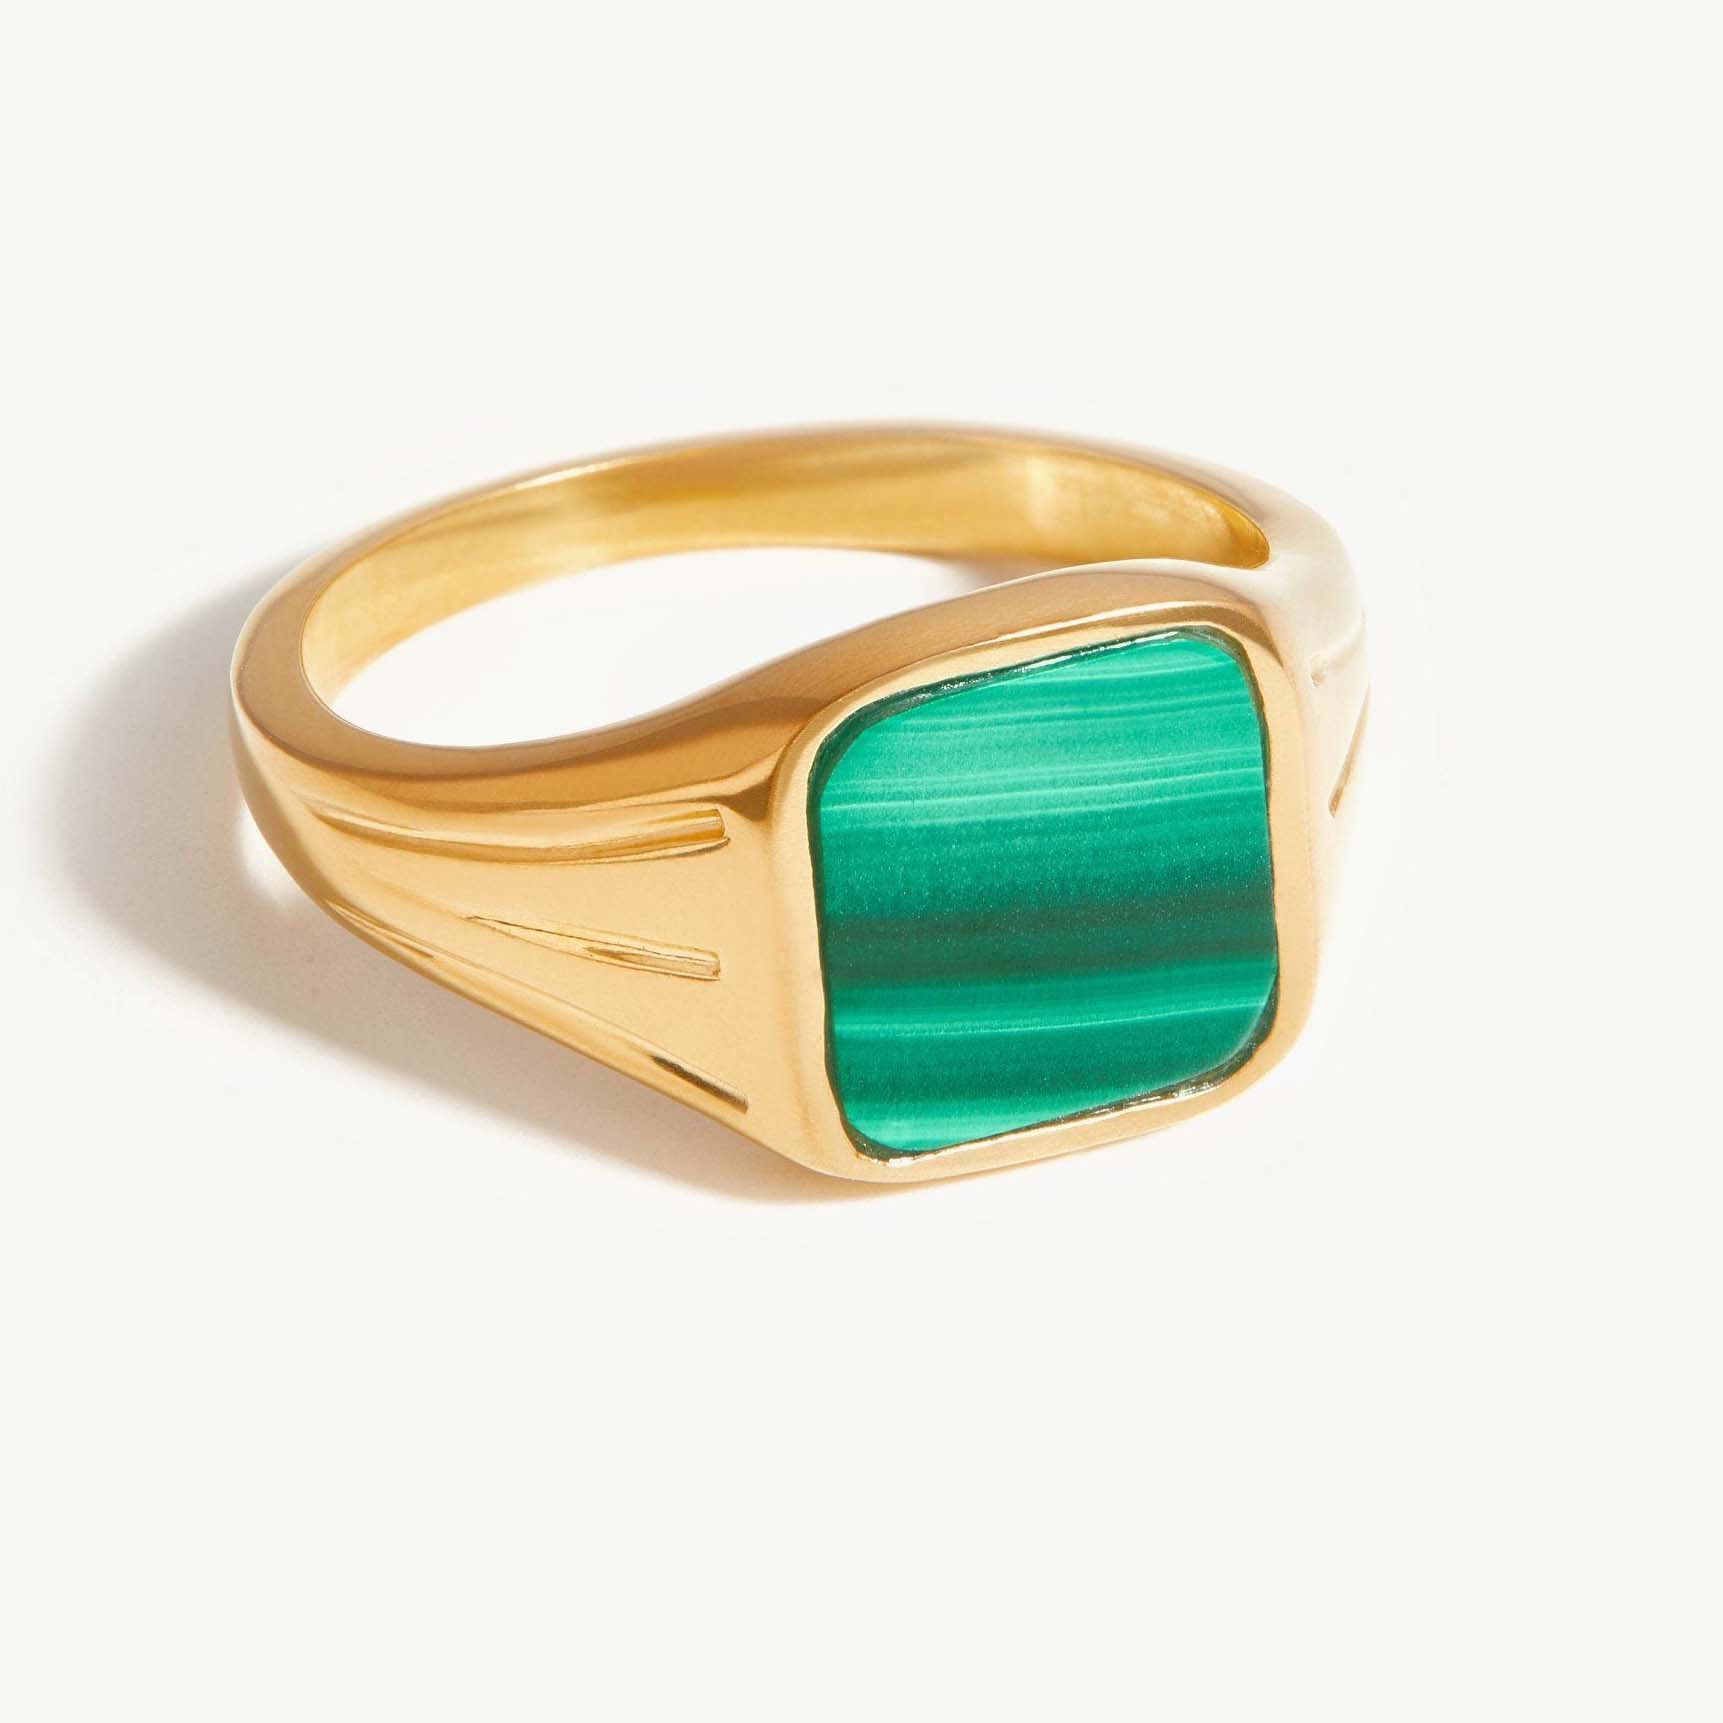 producing  your own square signet ring designs in 18k gold plated